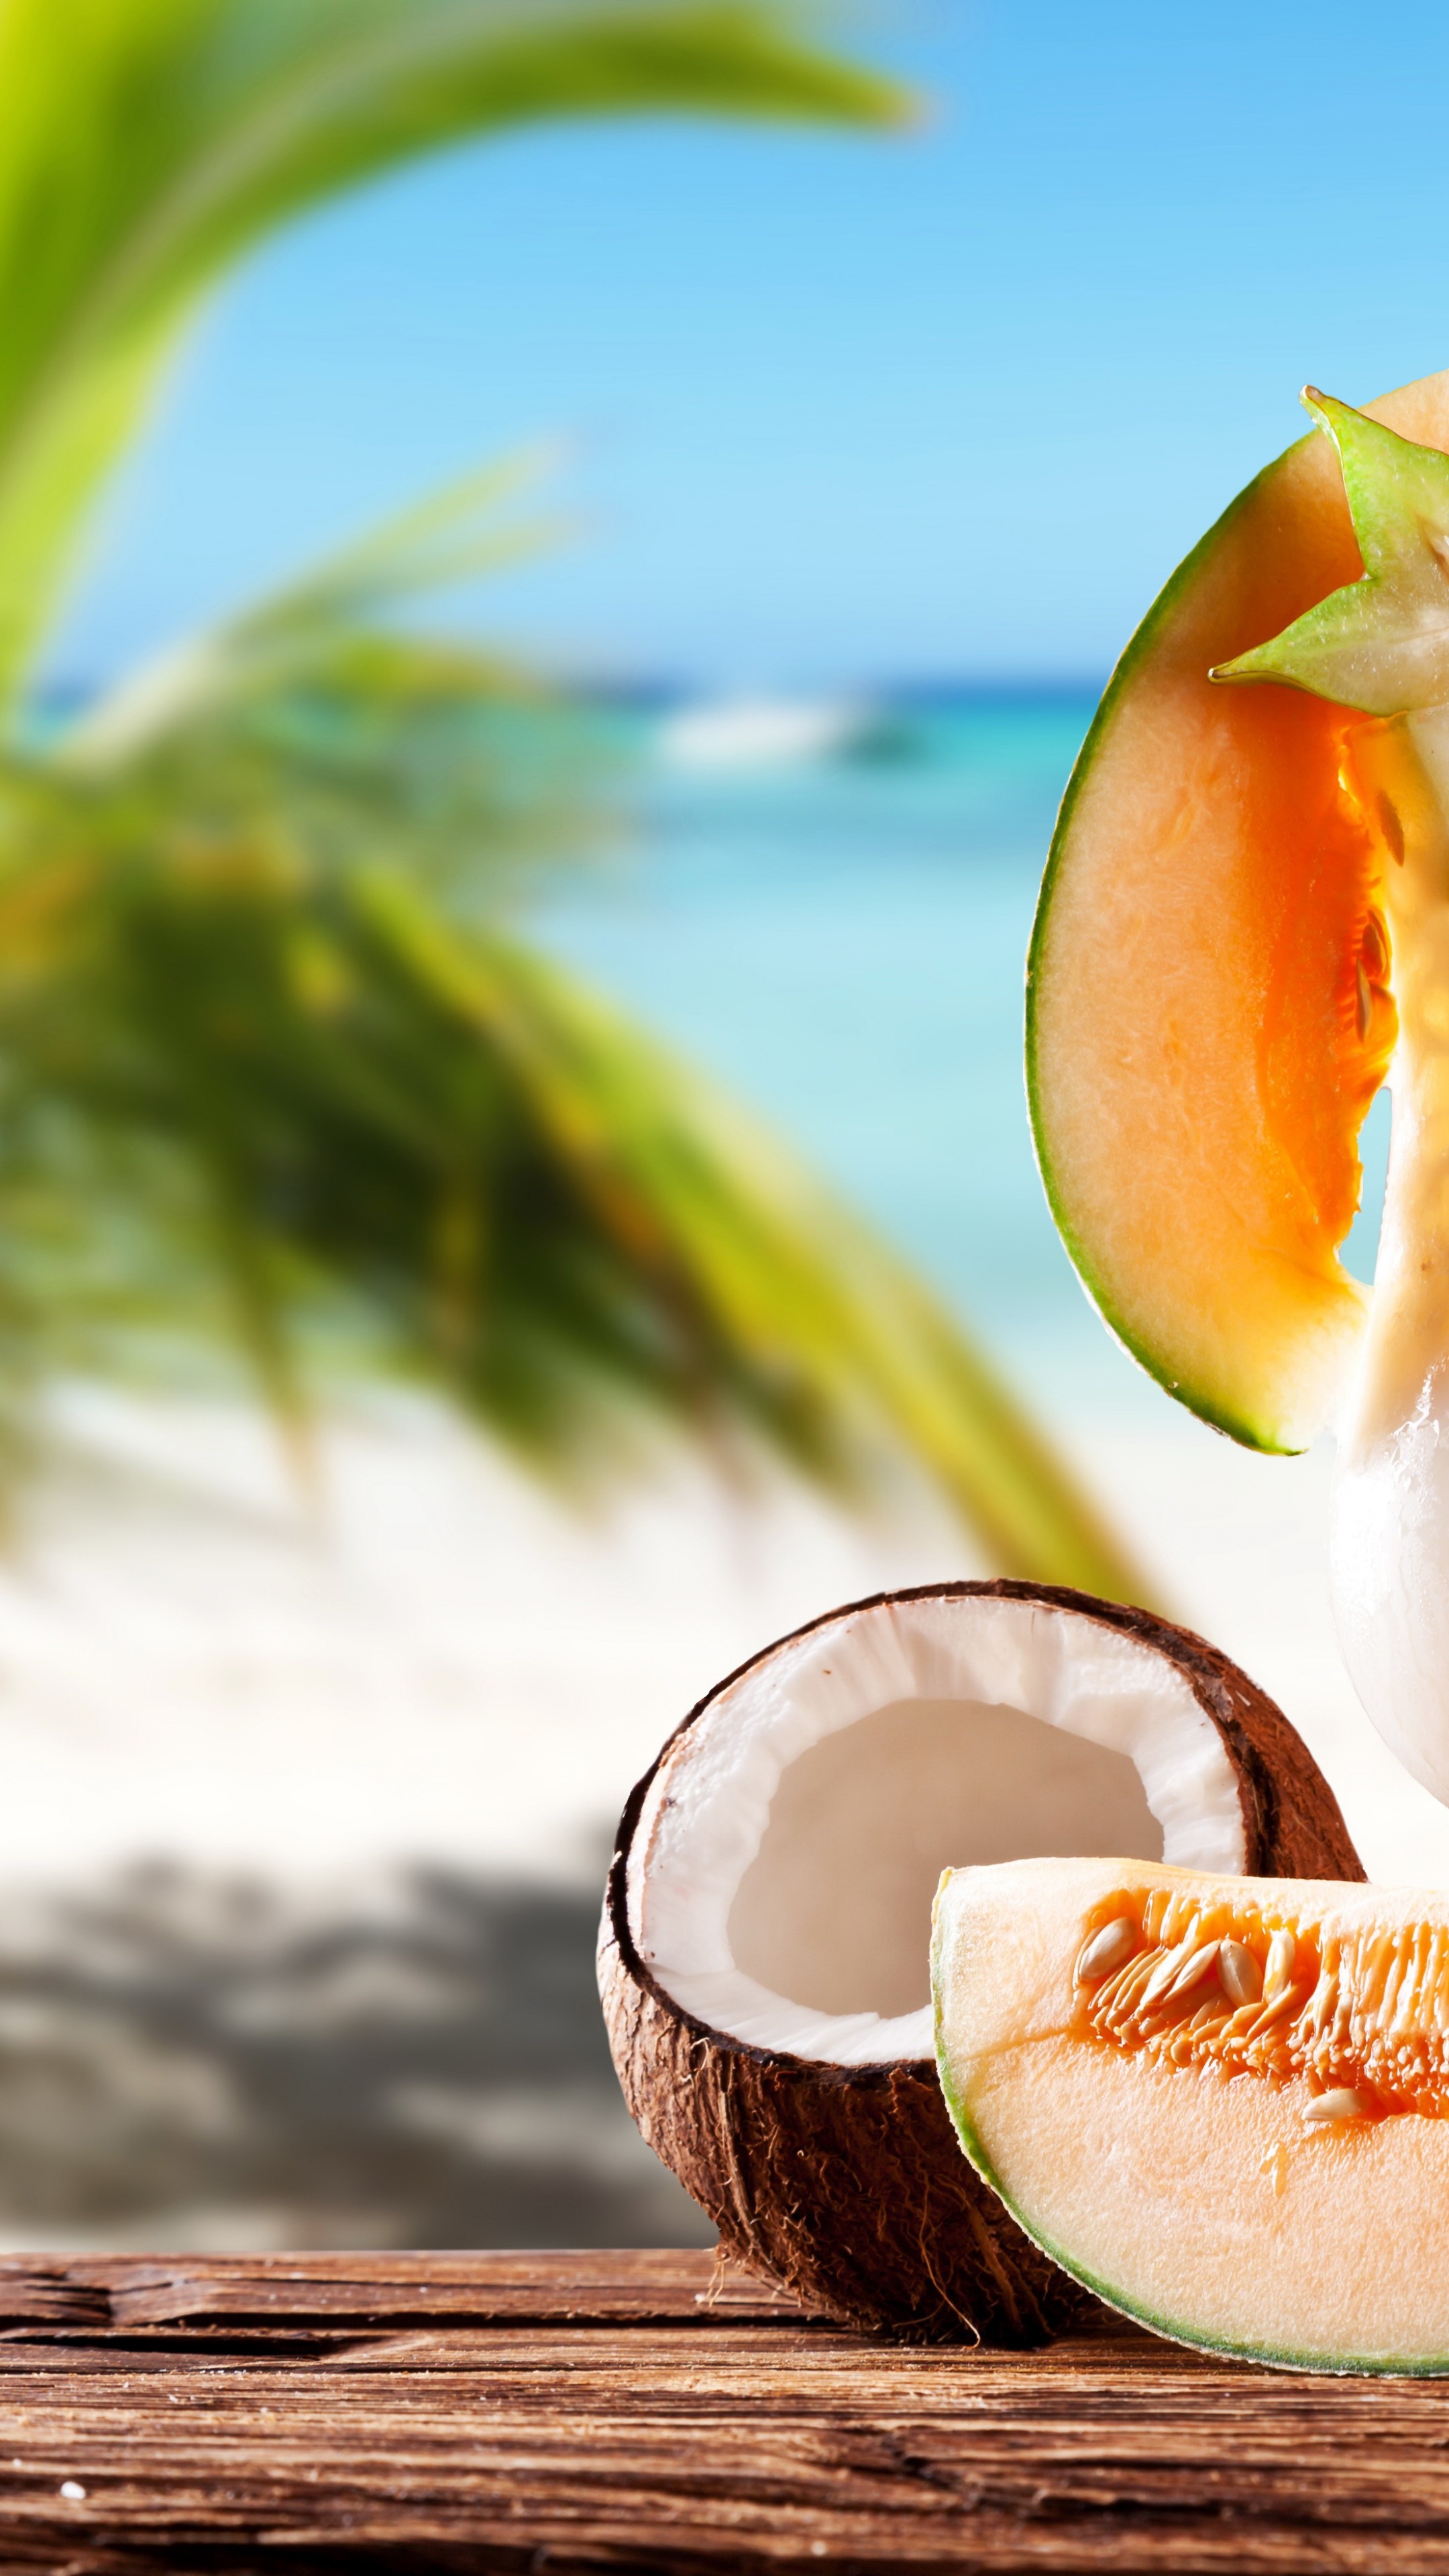 Coconut: Summer, Fruit, Melon, The only living species of the genus Cocos. 2160x3840 4K Background.